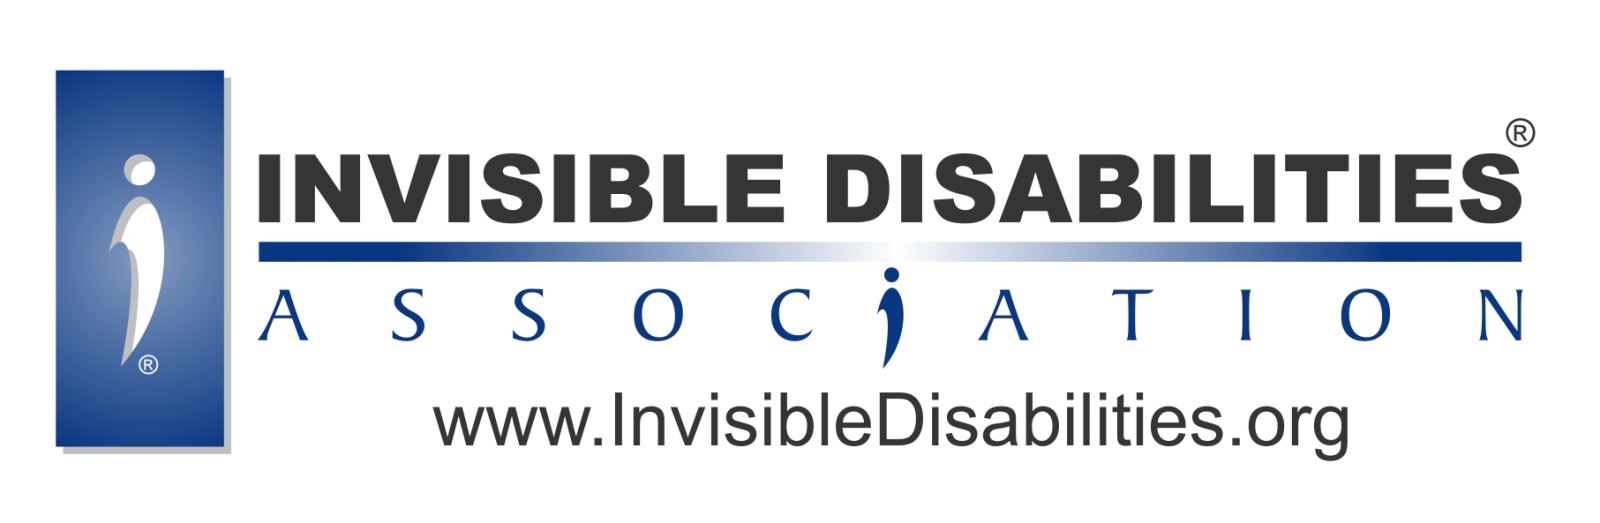 invisible disabilities